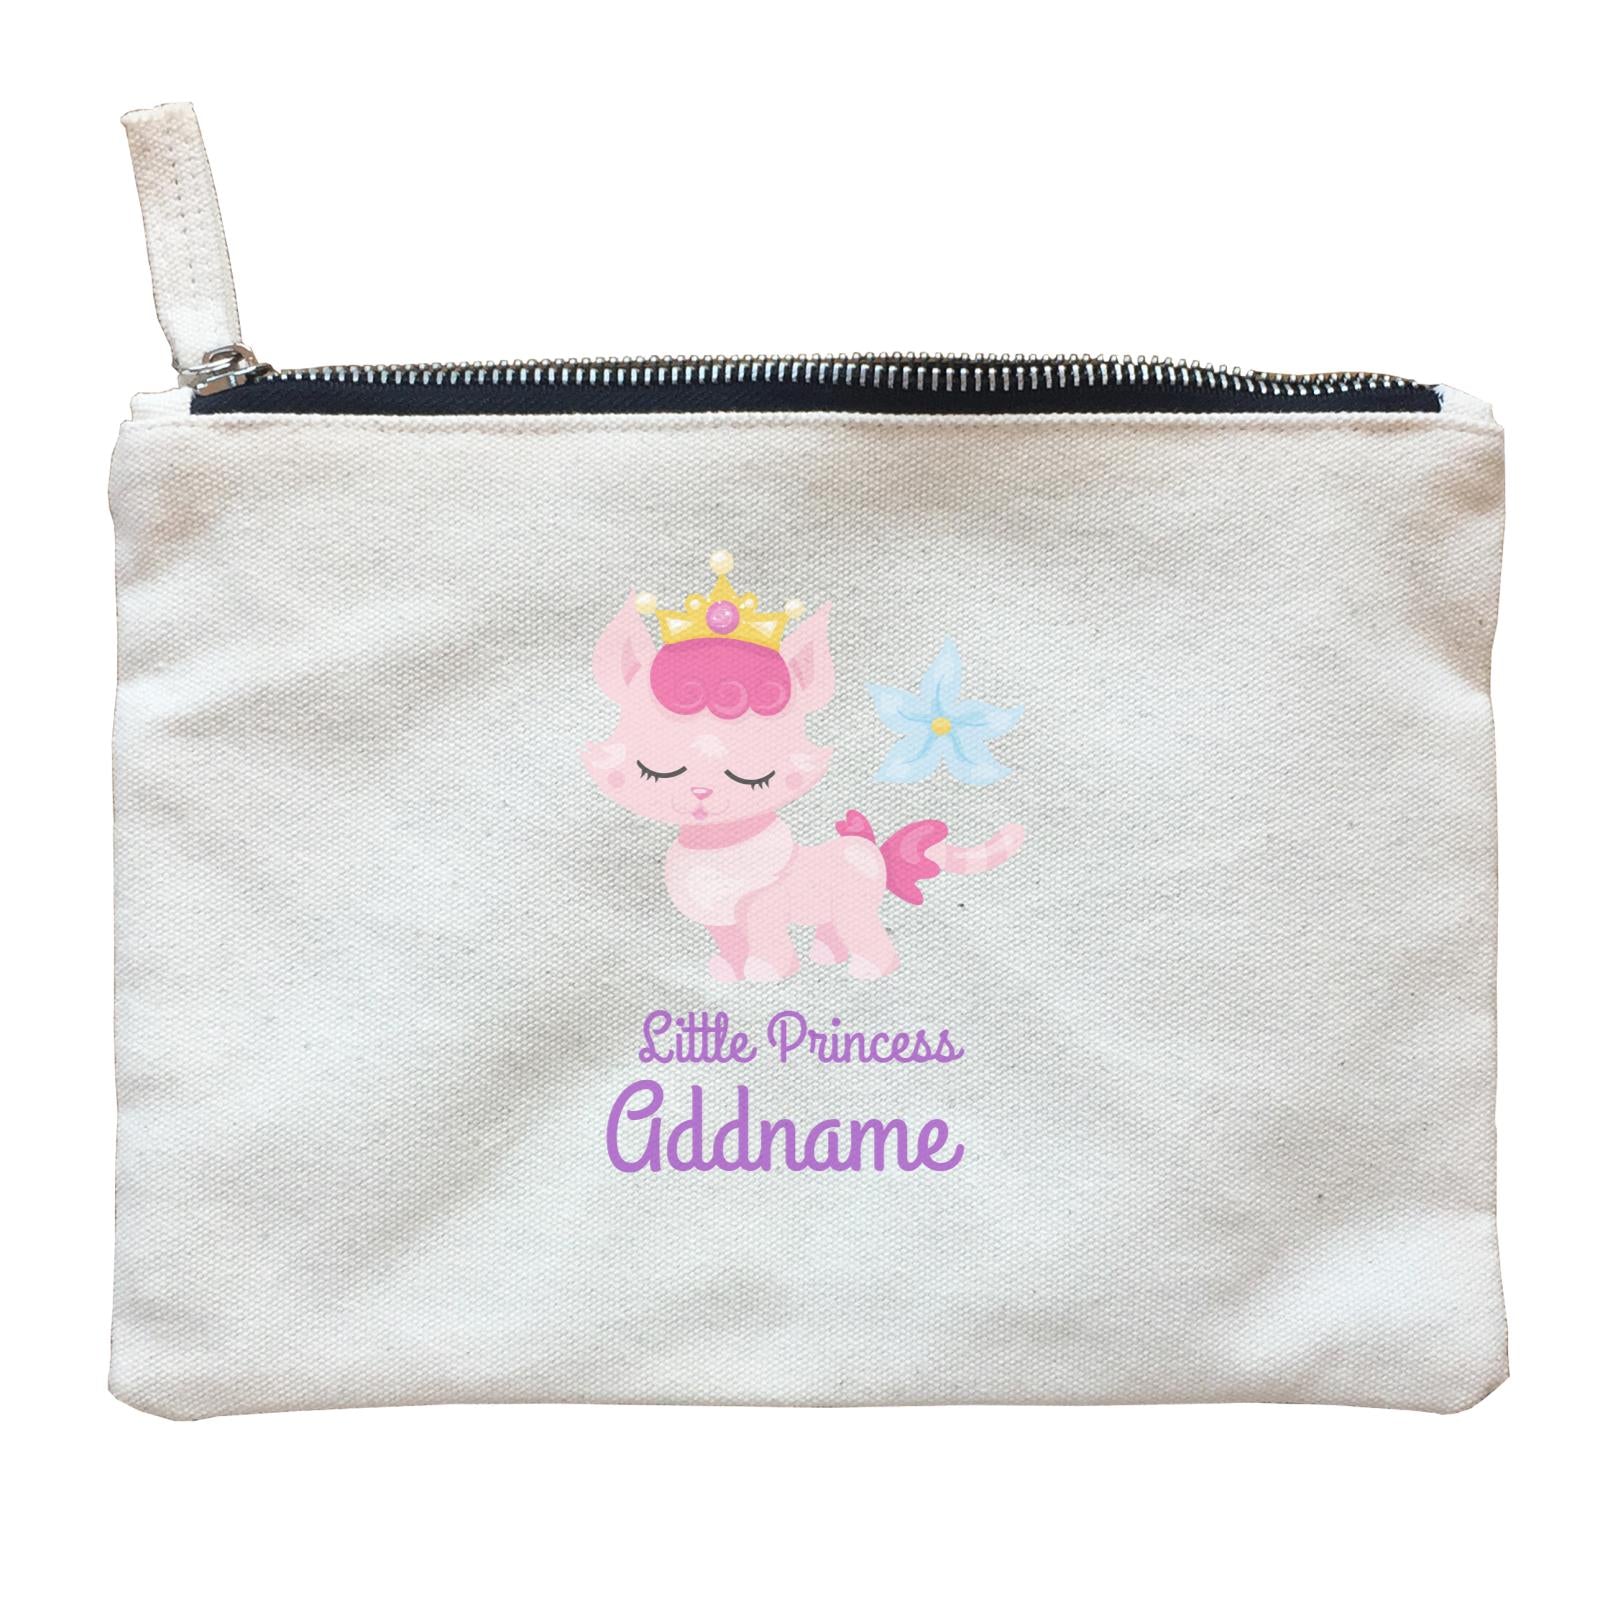 Little Princess Pets Pink Cat with Crown Addname Zipper Pouch